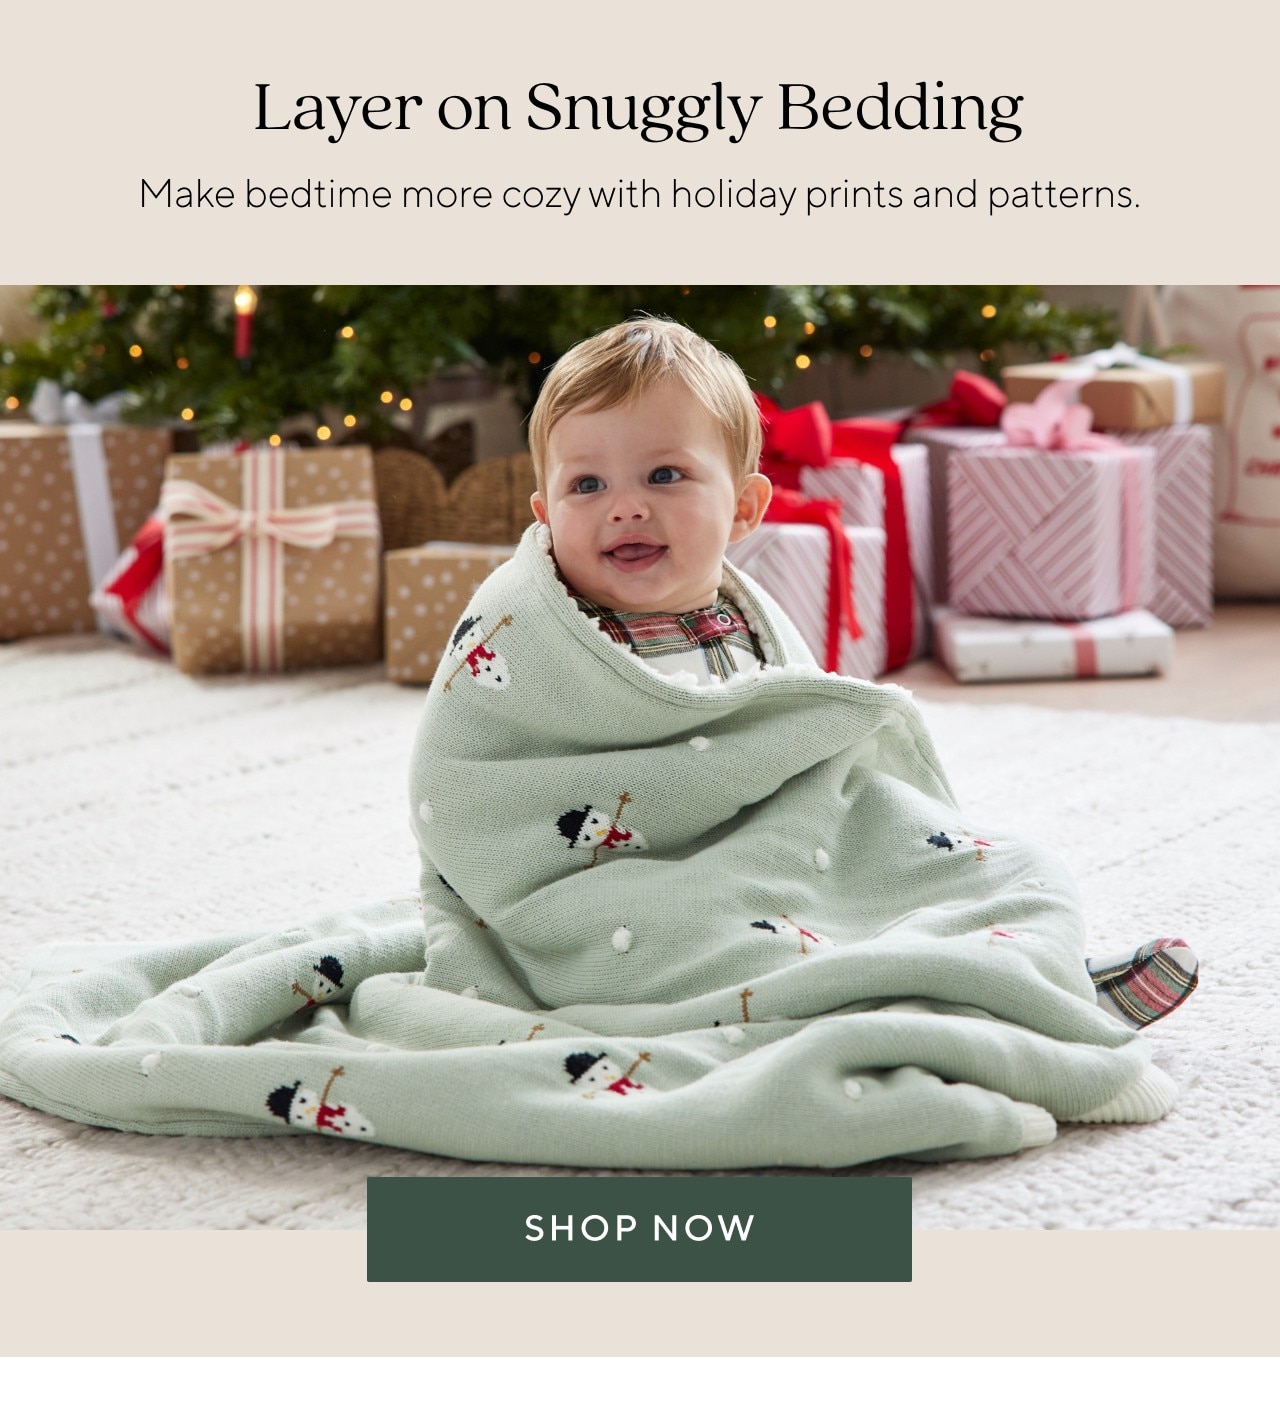 LAYER ON SNUGGLY BEDDING